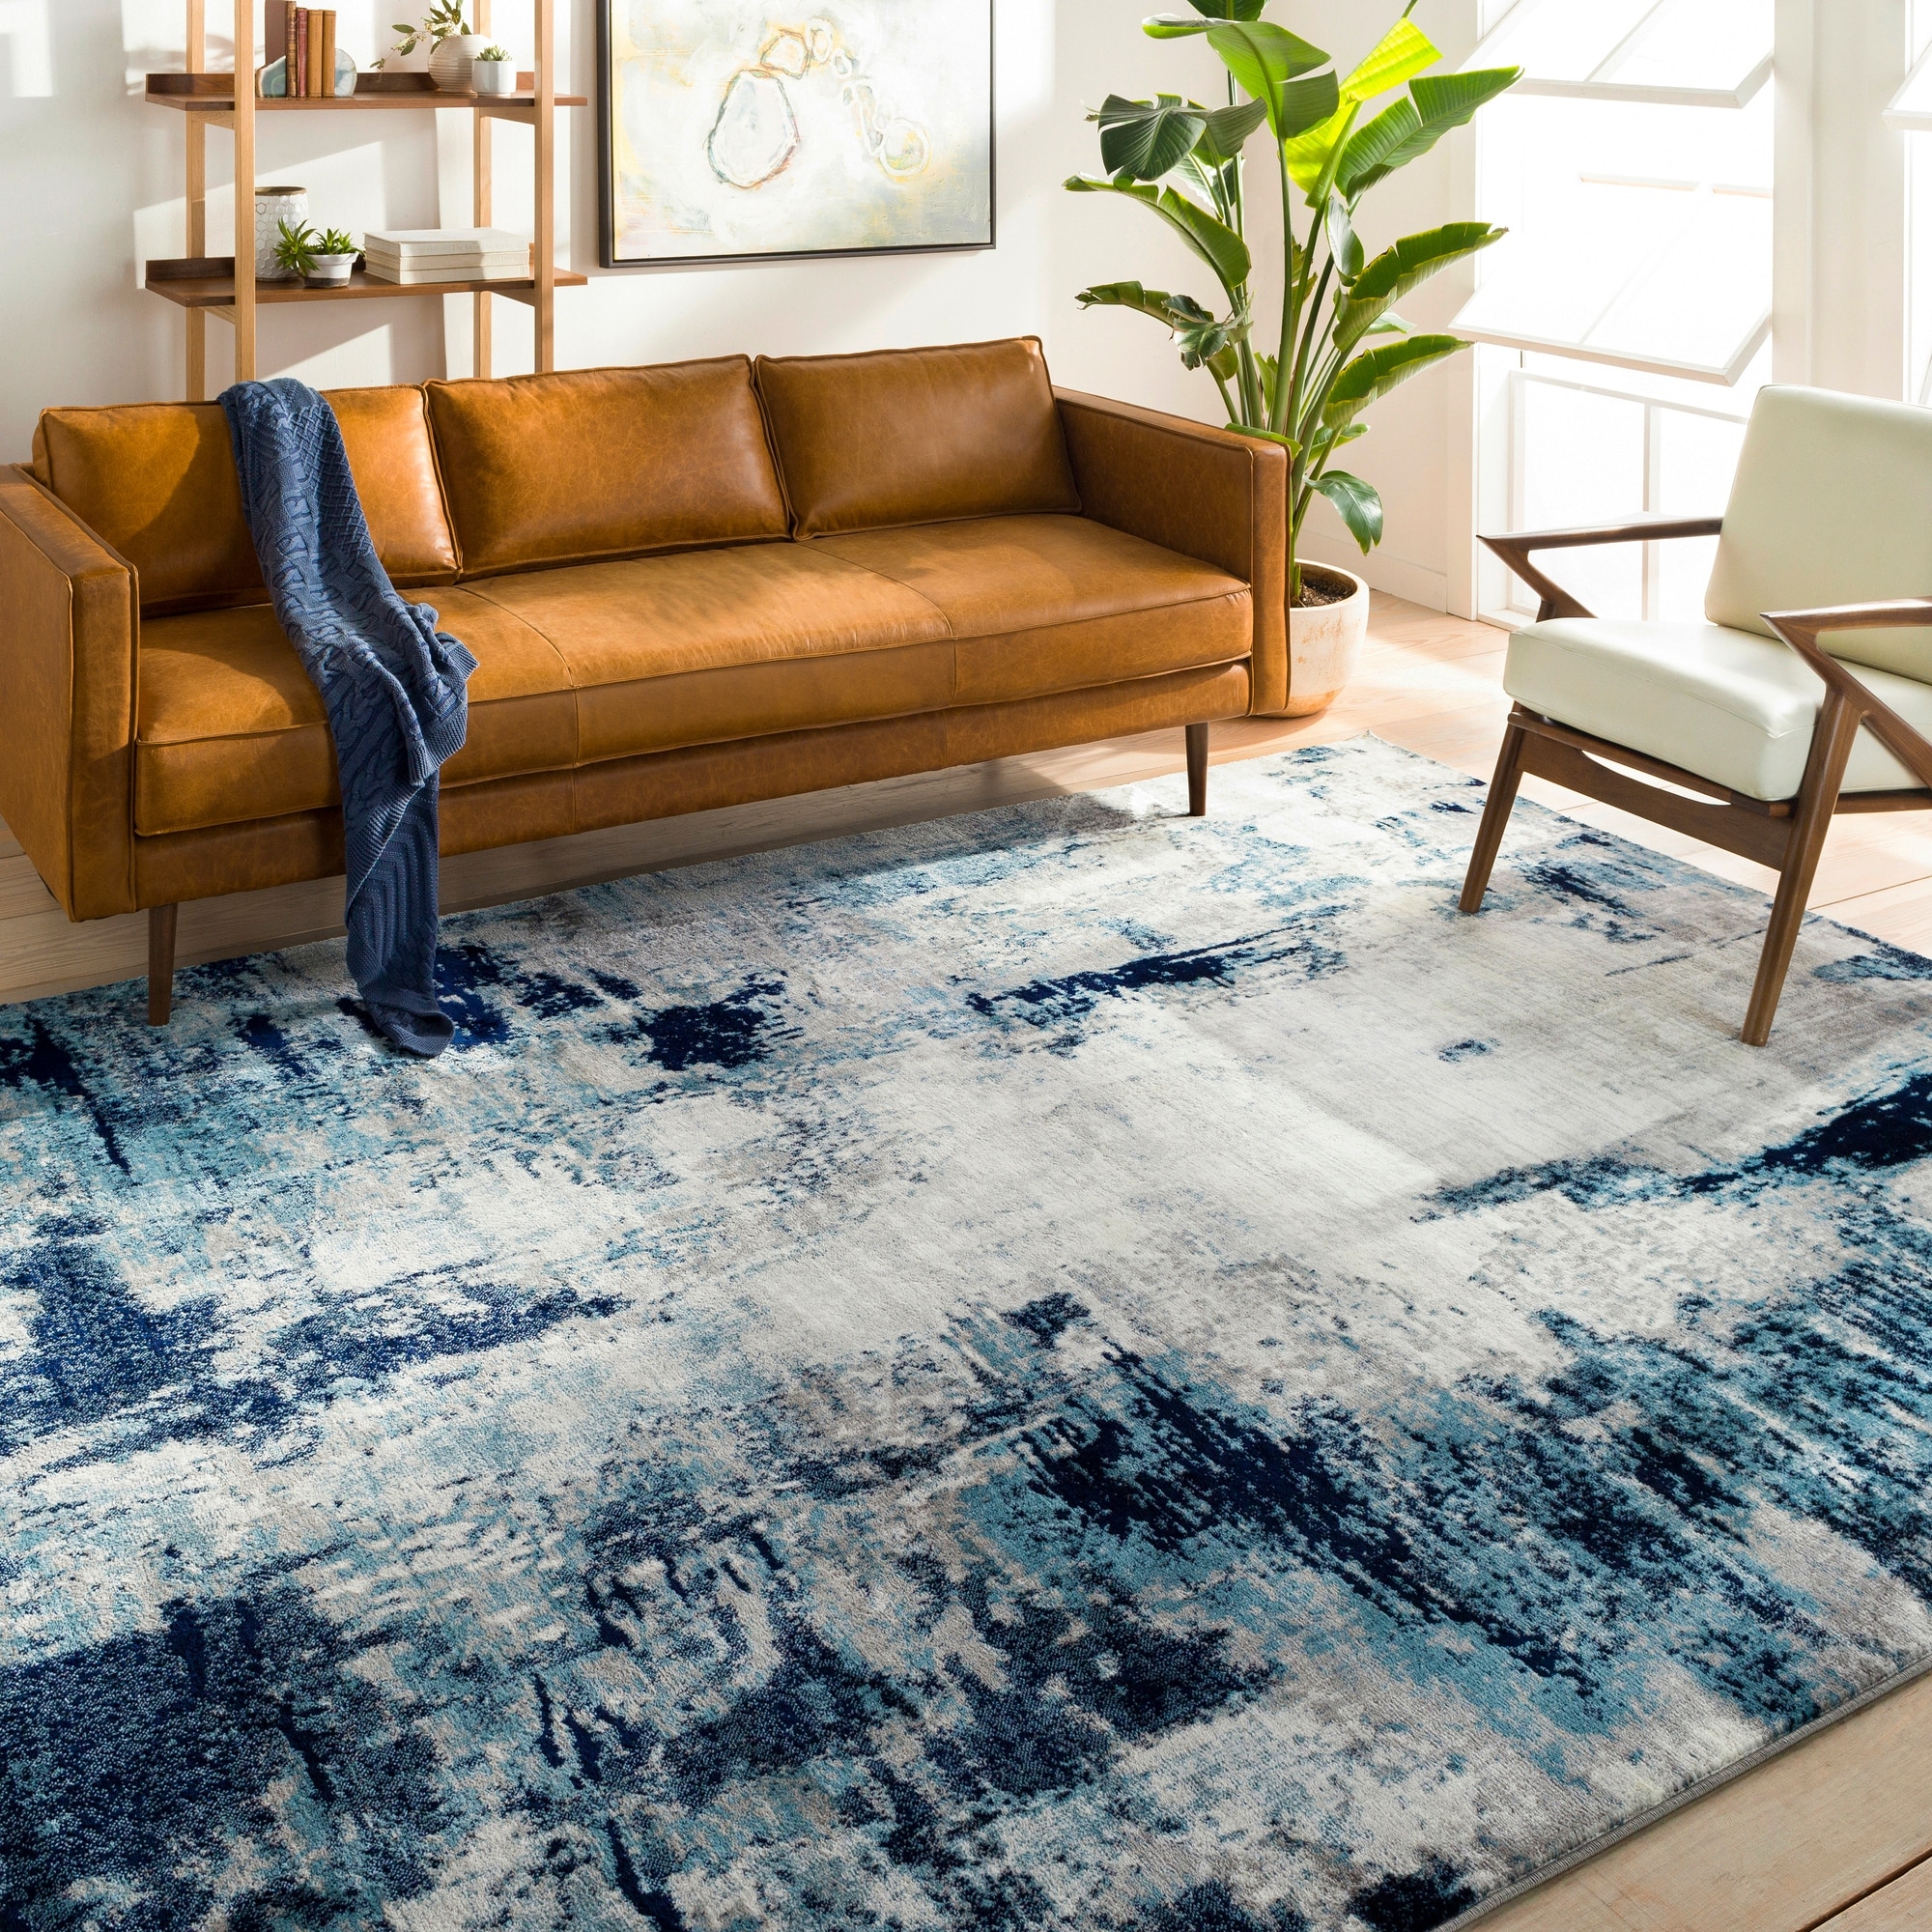 https://ak1.ostkcdn.com/images/products/is/images/direct/a572a0b196b2007f546a1049996aebfe69582263/Cooke-Industrial-Abstract-Polyester-Area-Rug.jpg